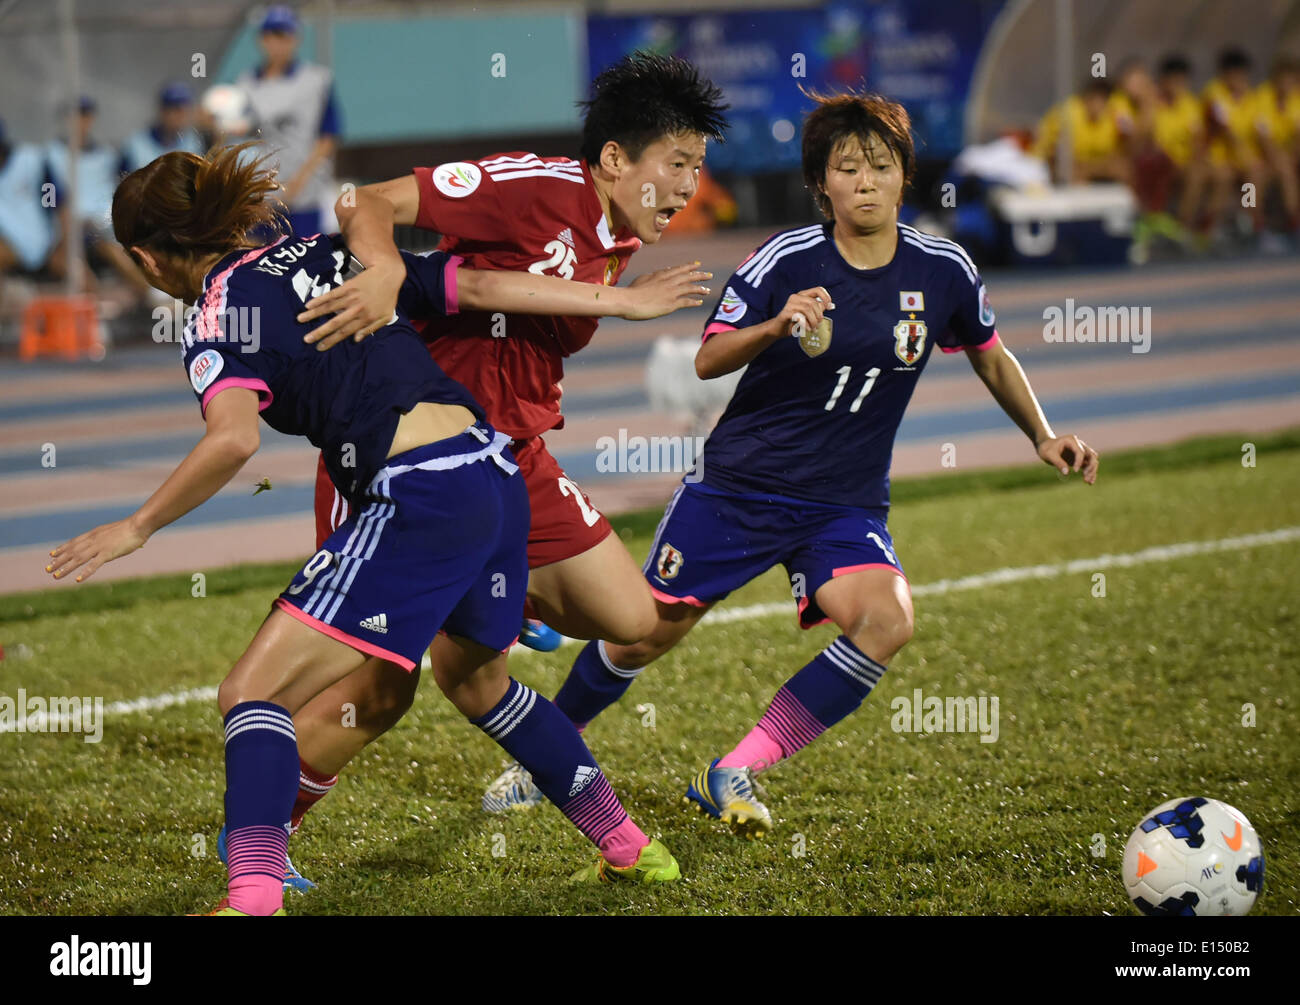 Ho Chi Minh City, Vietnam. 22nd May, 2014. Ma Xiaoxu (C) of China vies with Utsugi Rum (L) of Japan during the semifinal at the 2014 Asian Football Confederation (AFC) Women's Asian Cup at Thong Nhat Stadium in Ho Chi Minh City, Vietnam, on May 22, 2014. Japan advanced to final after beating China 2-1. © Cheong Kam ka/Xinhua/Alamy Live News Stock Photo